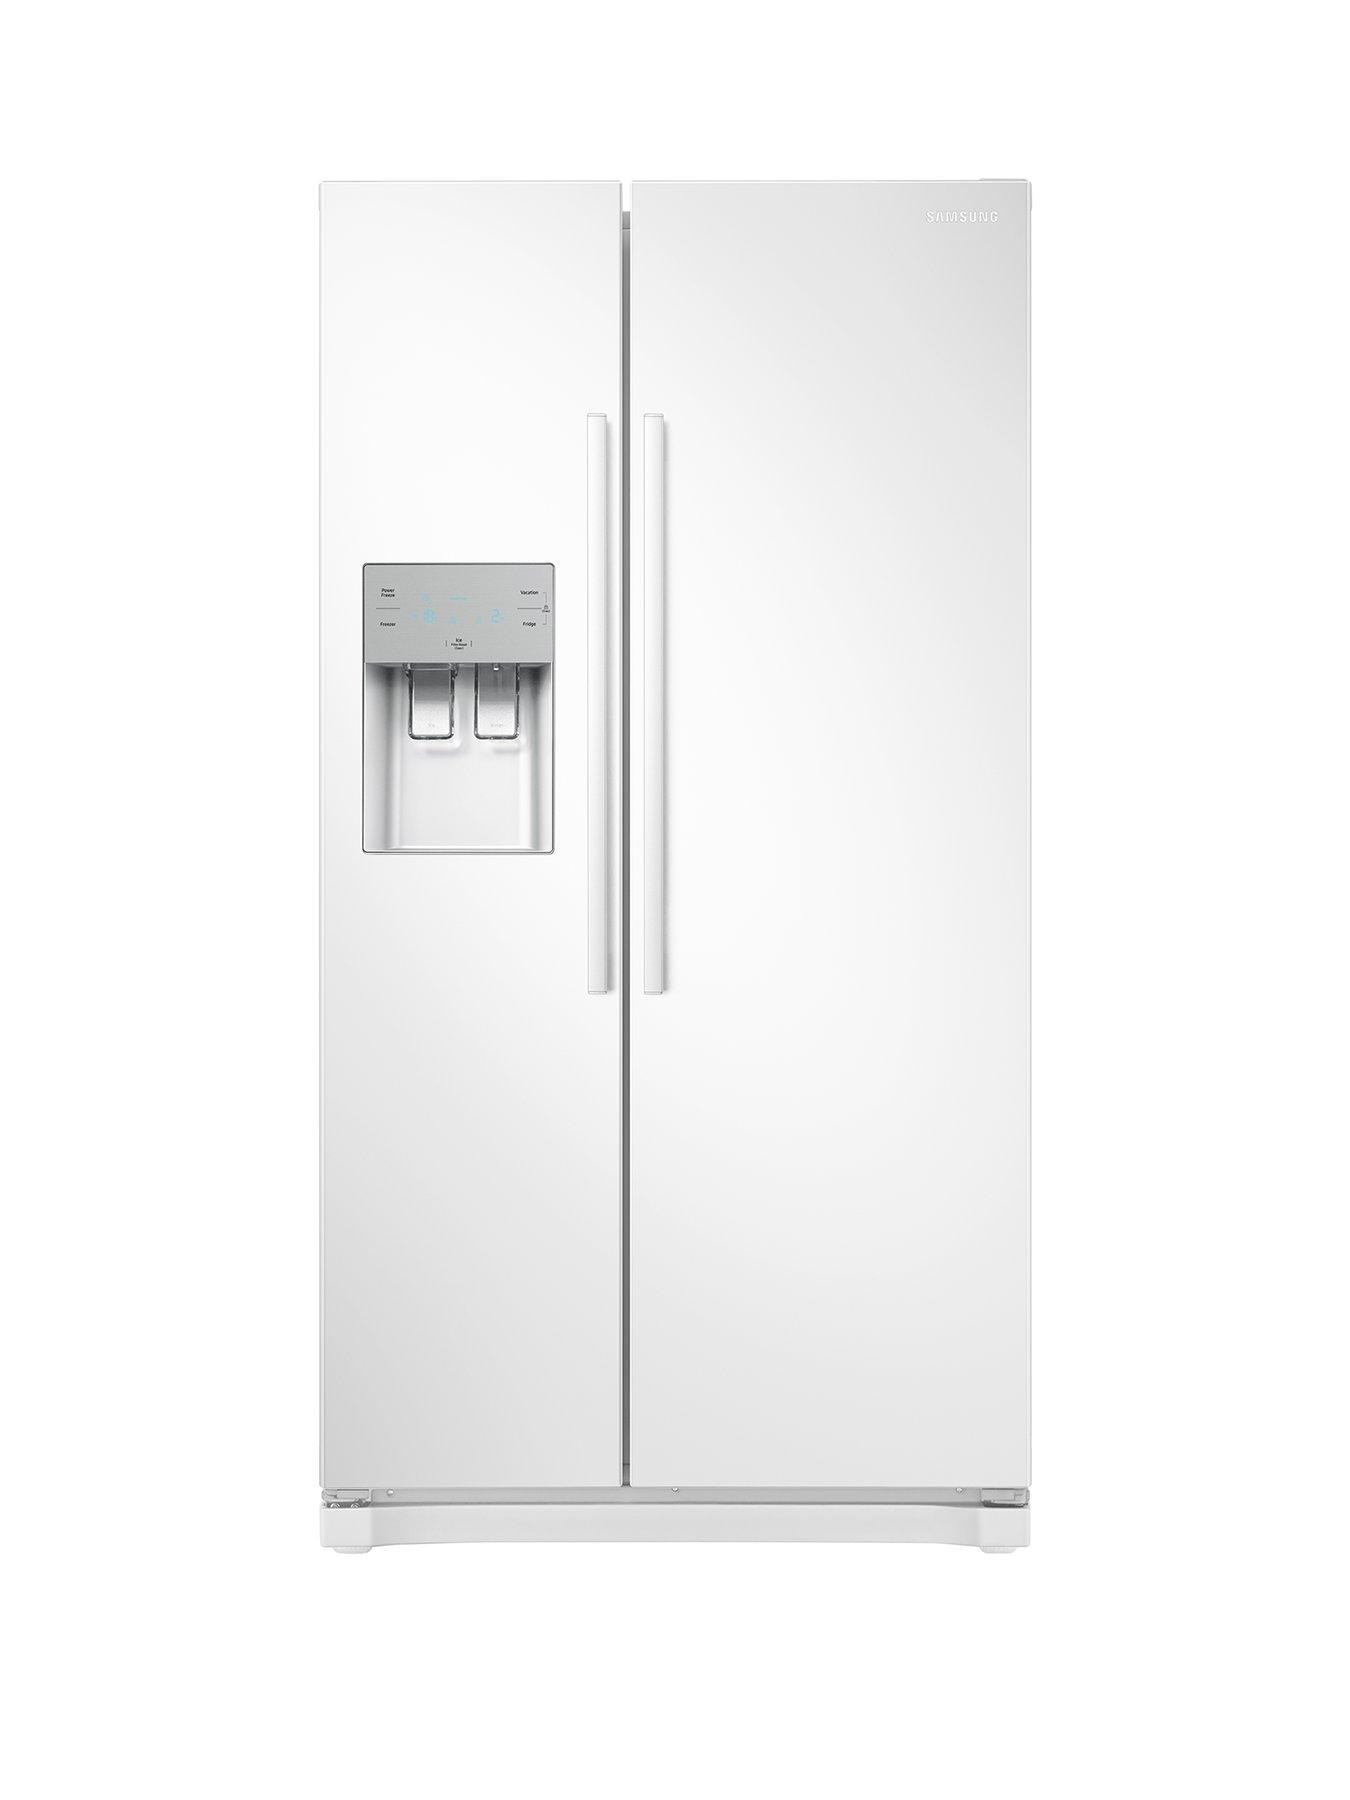 Samsung Rs50N3513Ww/Eu America Style Frost-Free Fridge Freezer With Plumbed Water, Ice Dispenser And 5 Year Samsung Parts And Labour Warranty – White